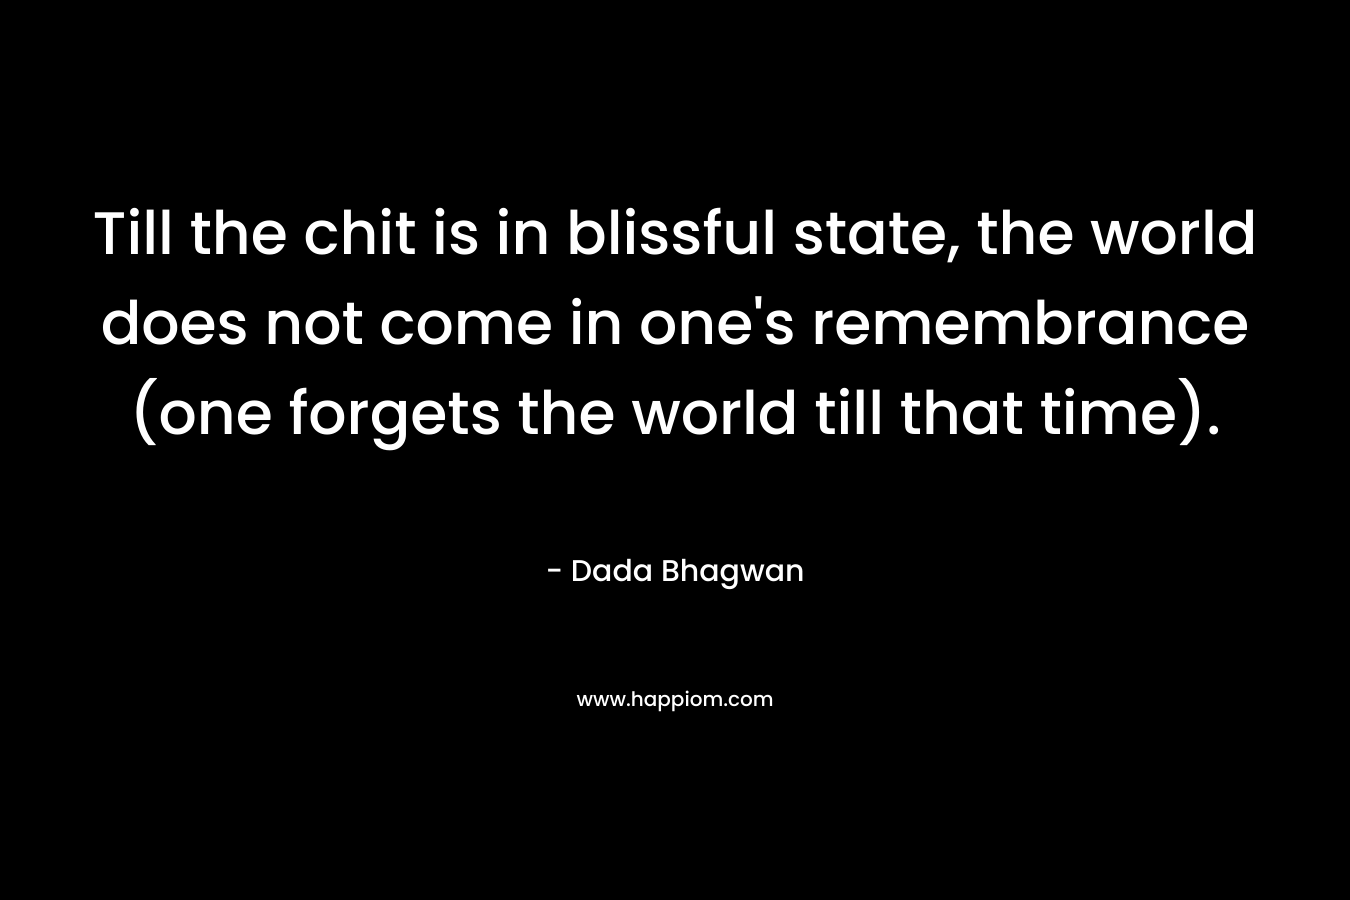 Till the chit is in blissful state, the world does not come in one’s remembrance (one forgets the world till that time). – Dada Bhagwan